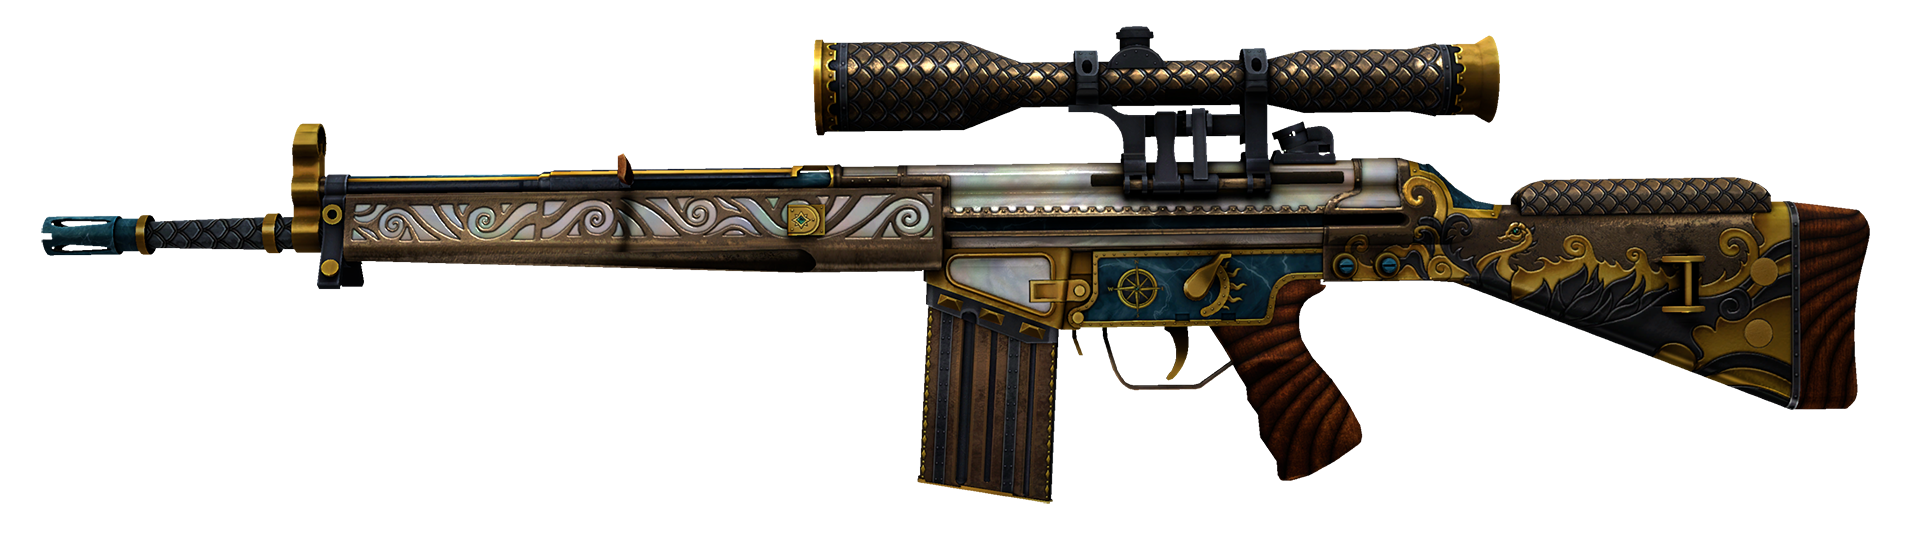 G3SG1 Stinger cs go skin download the new version for iphone